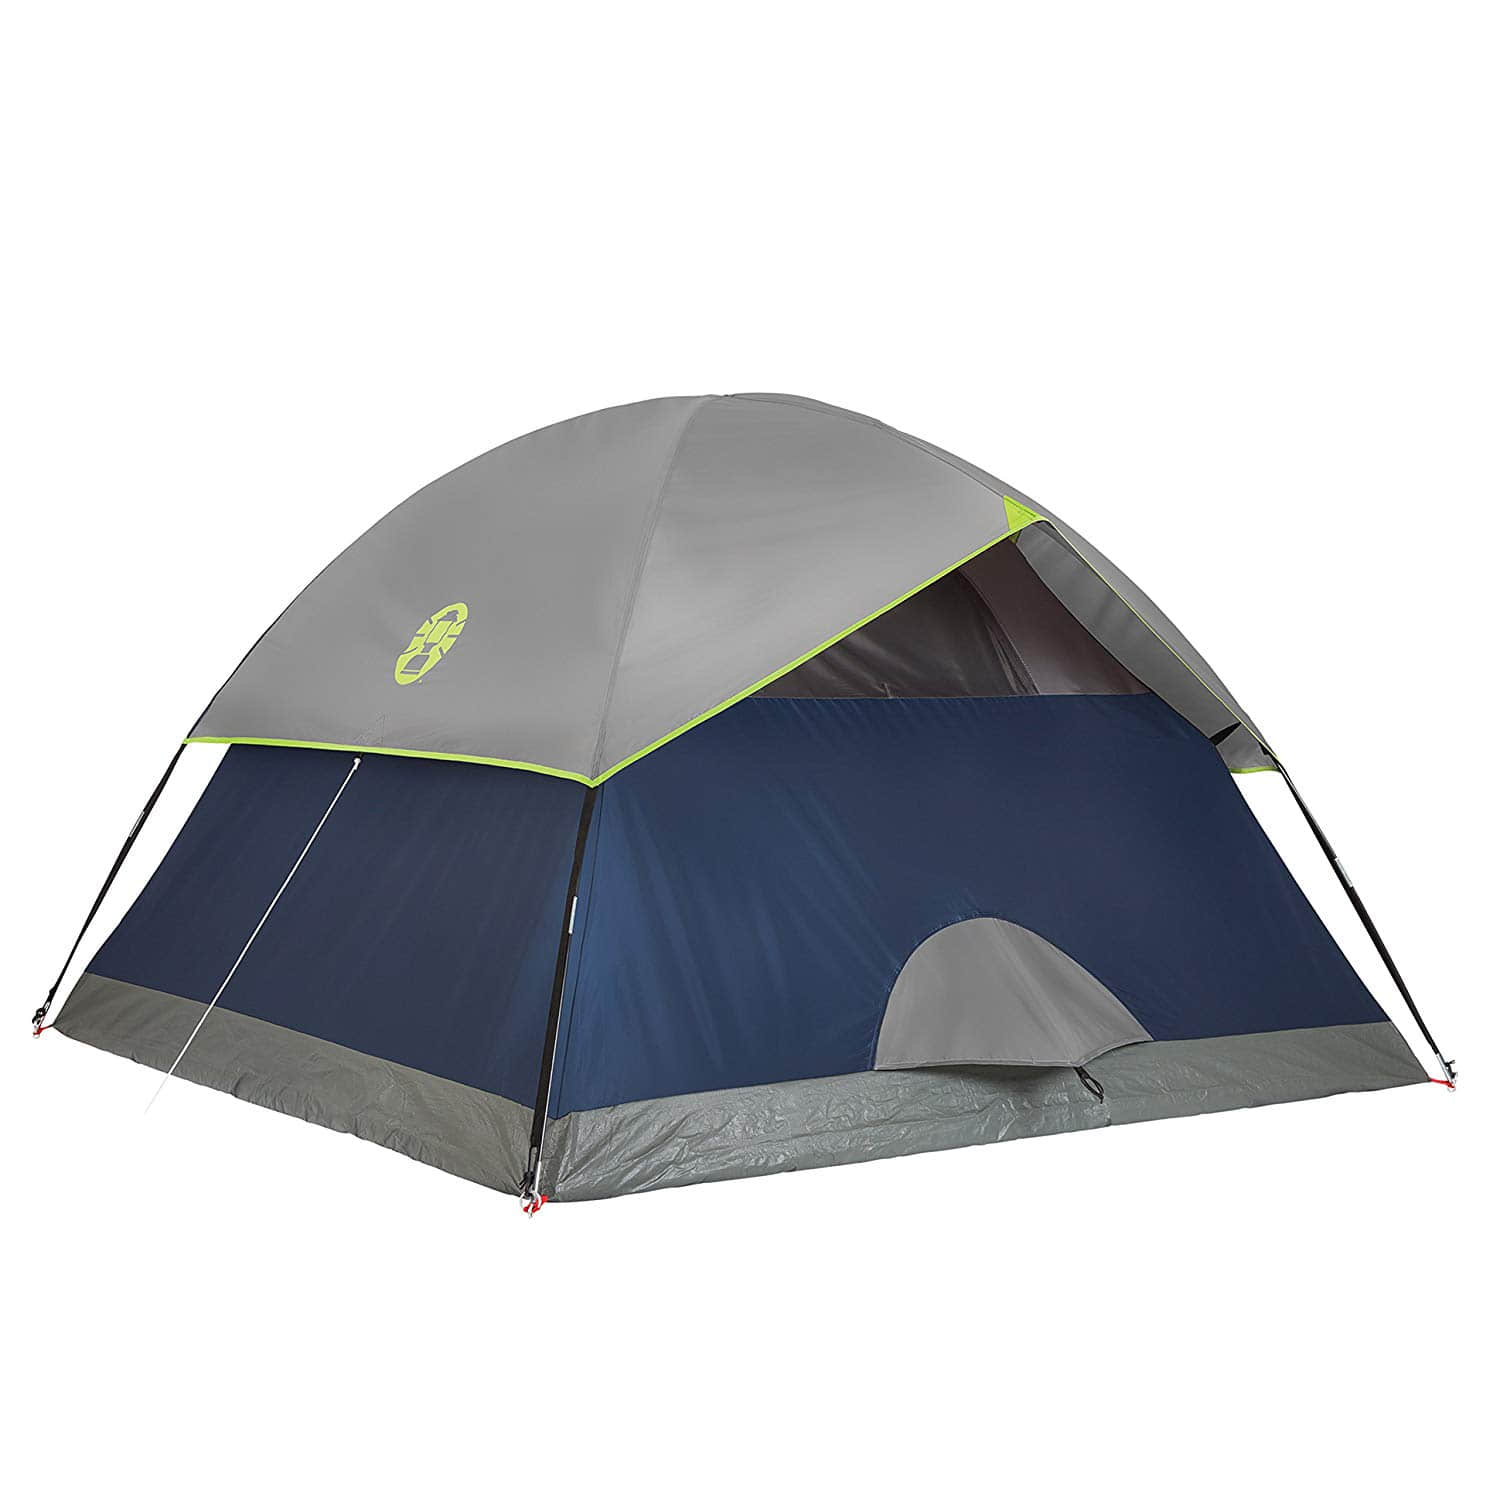 Sundome 4-Person Outdoor Tent by Coleman(Navy Color)